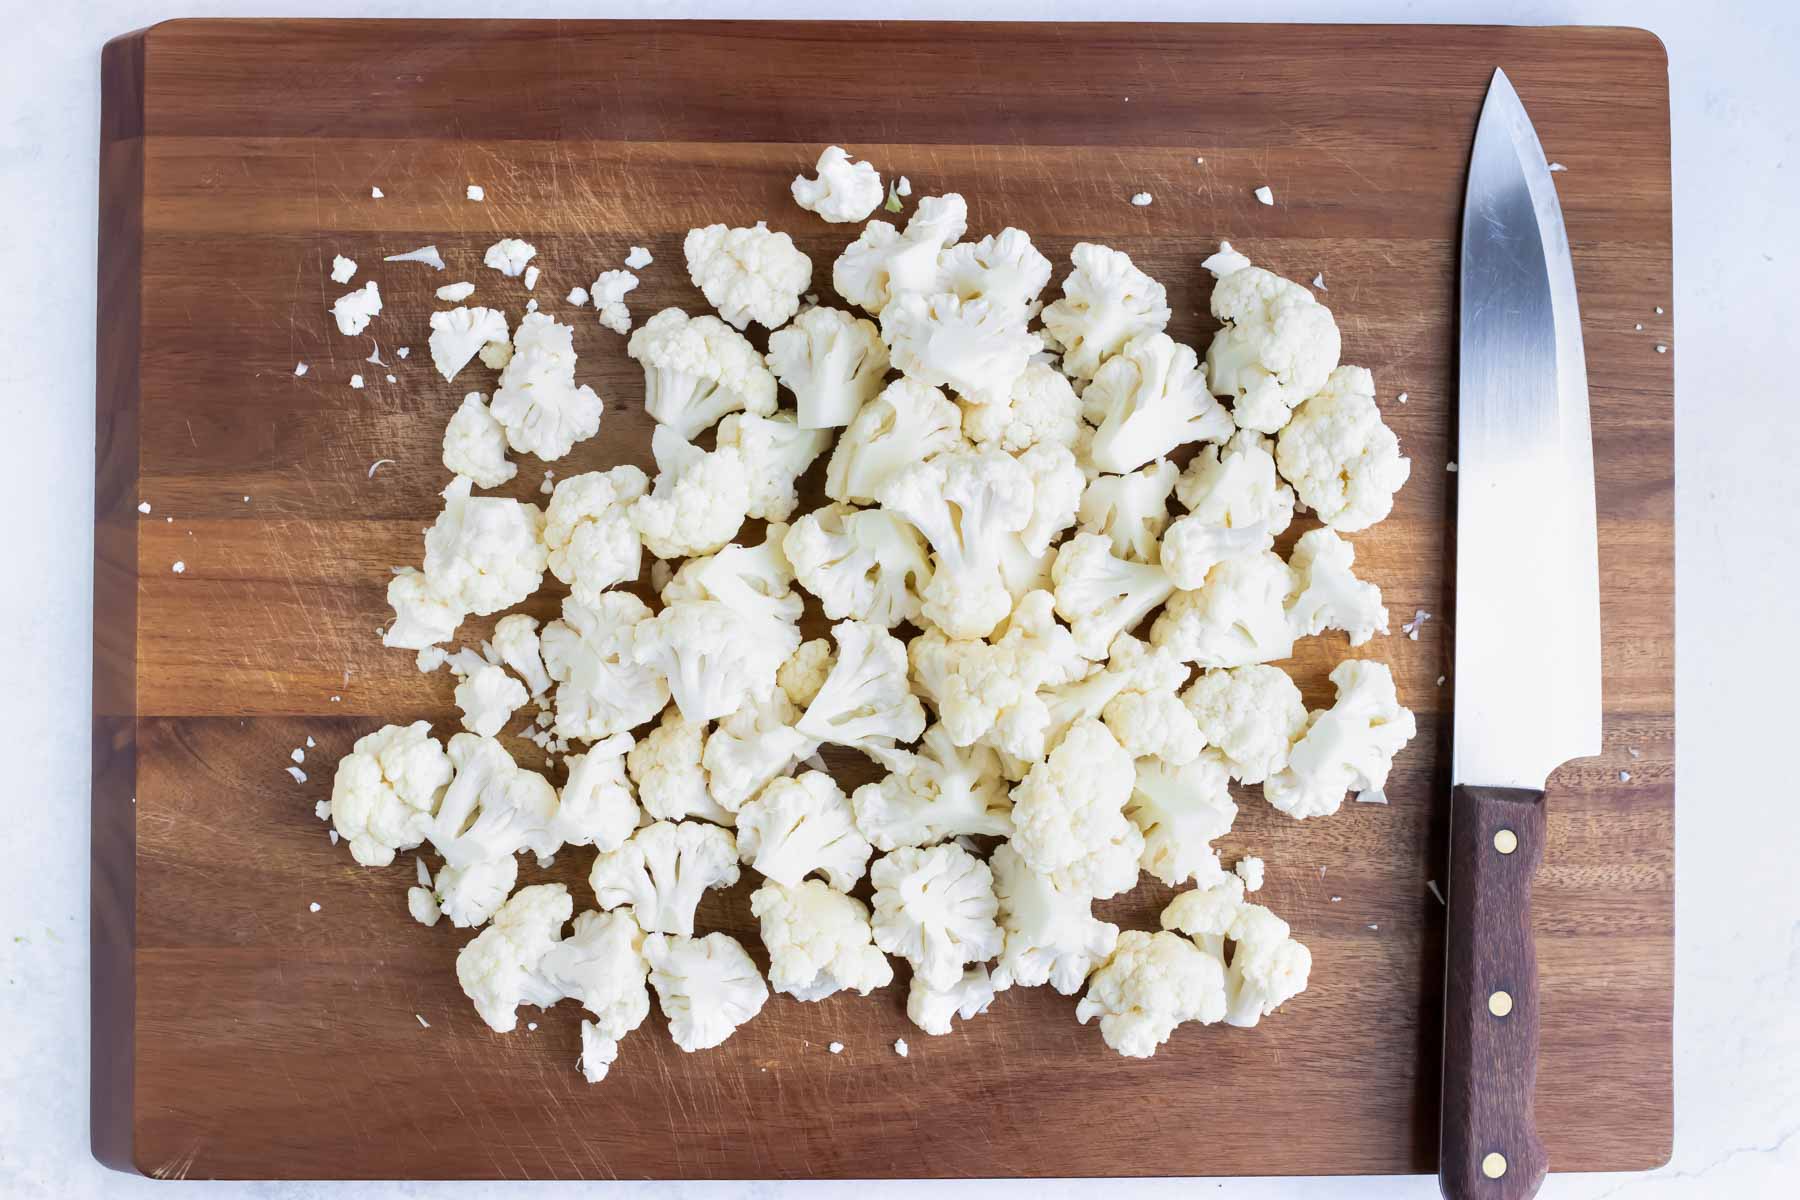 Fresh cauliflower is cut into florets before roasting in the oven.